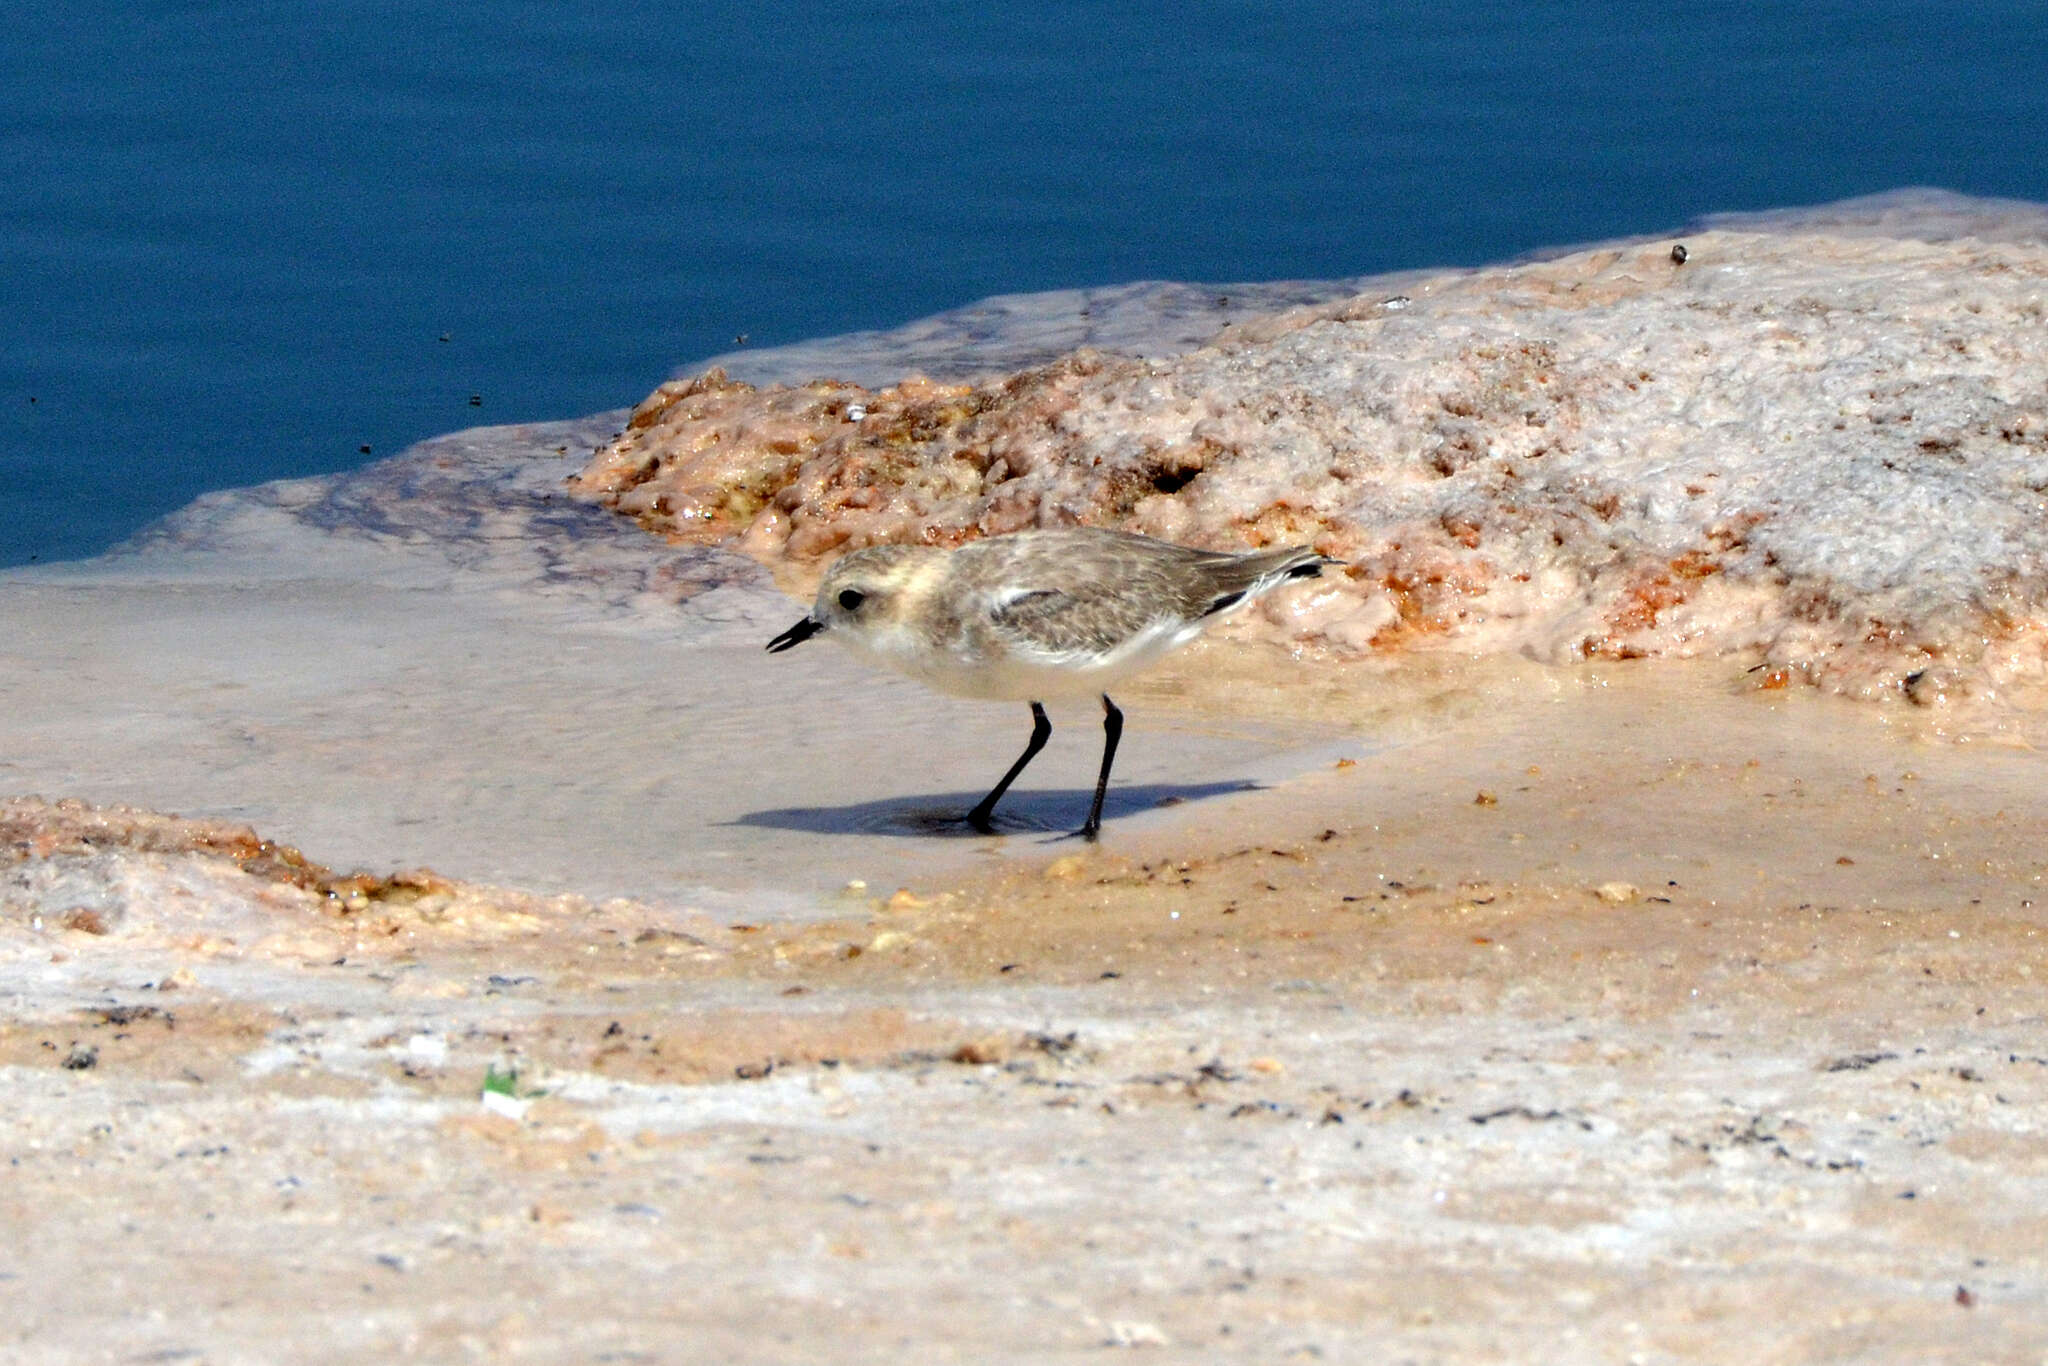 Image of Puna Plover